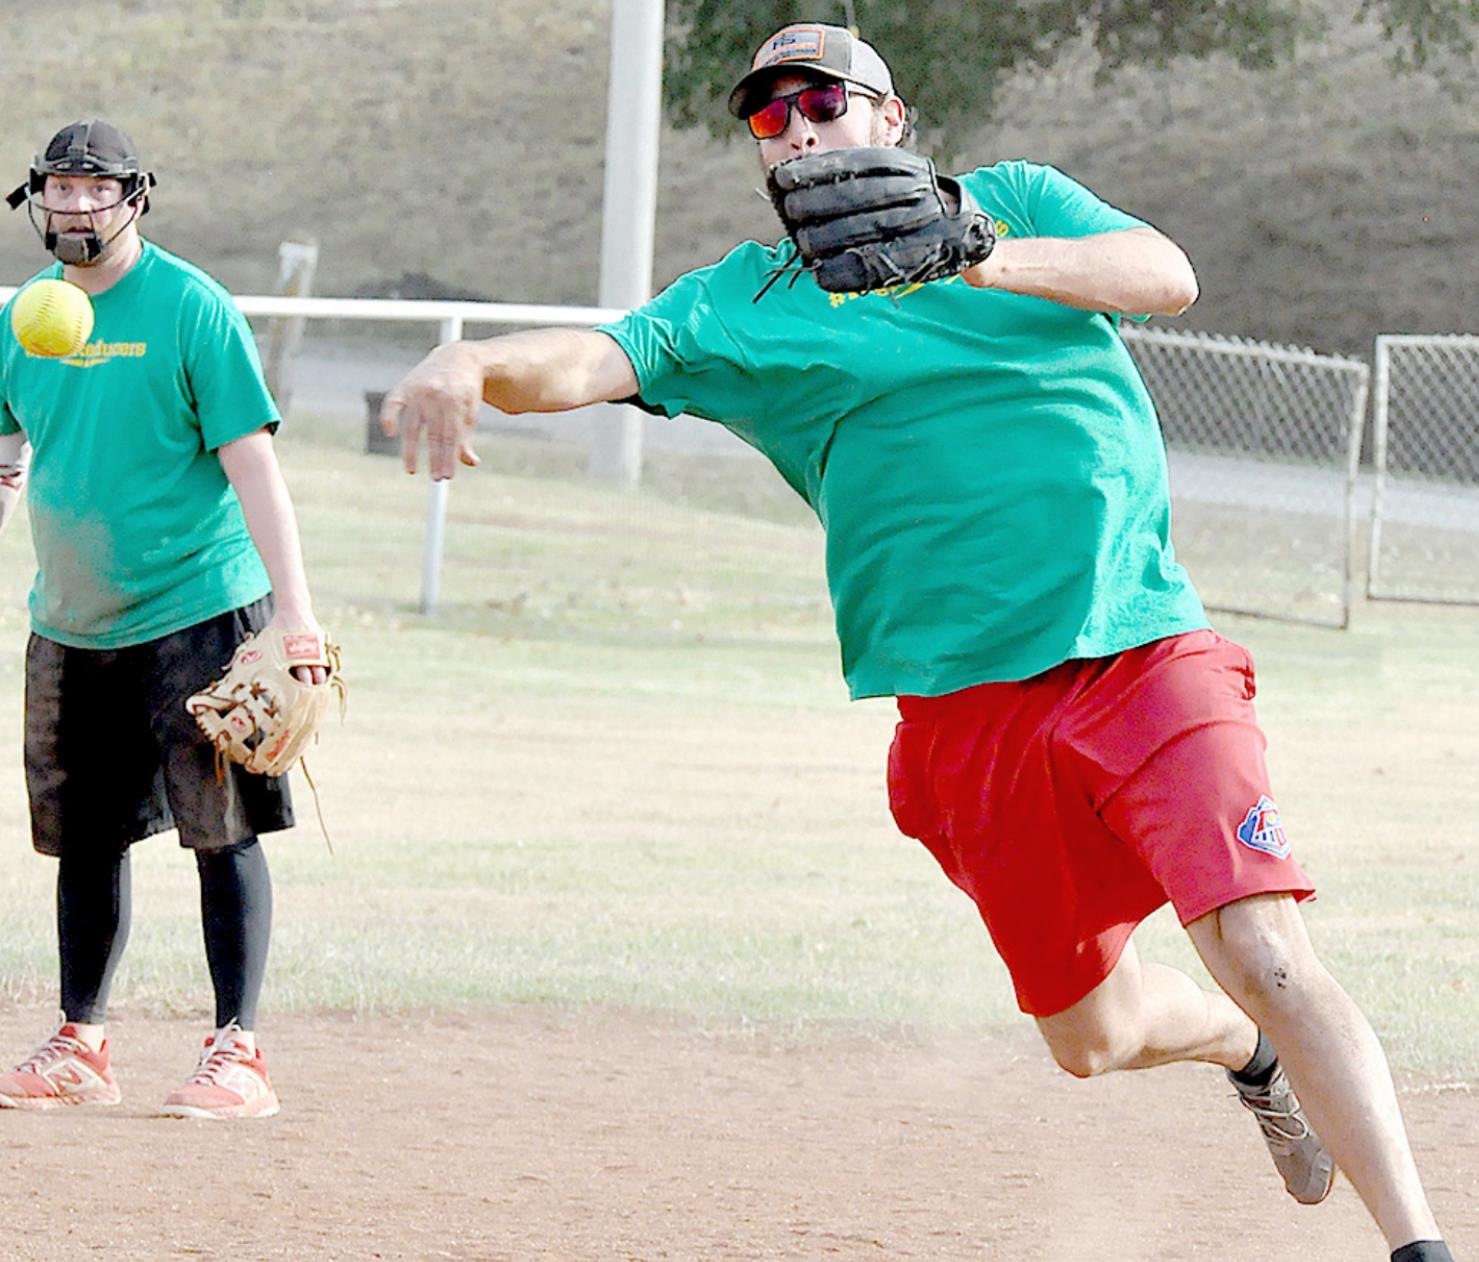 CHRIS PULEC, who resides in Pine, Colo., fires the ball to first base, while Jeremy Robinson, Newton, looks on. The action took place at the softball tournament held on Saturday at Kincaid Field.